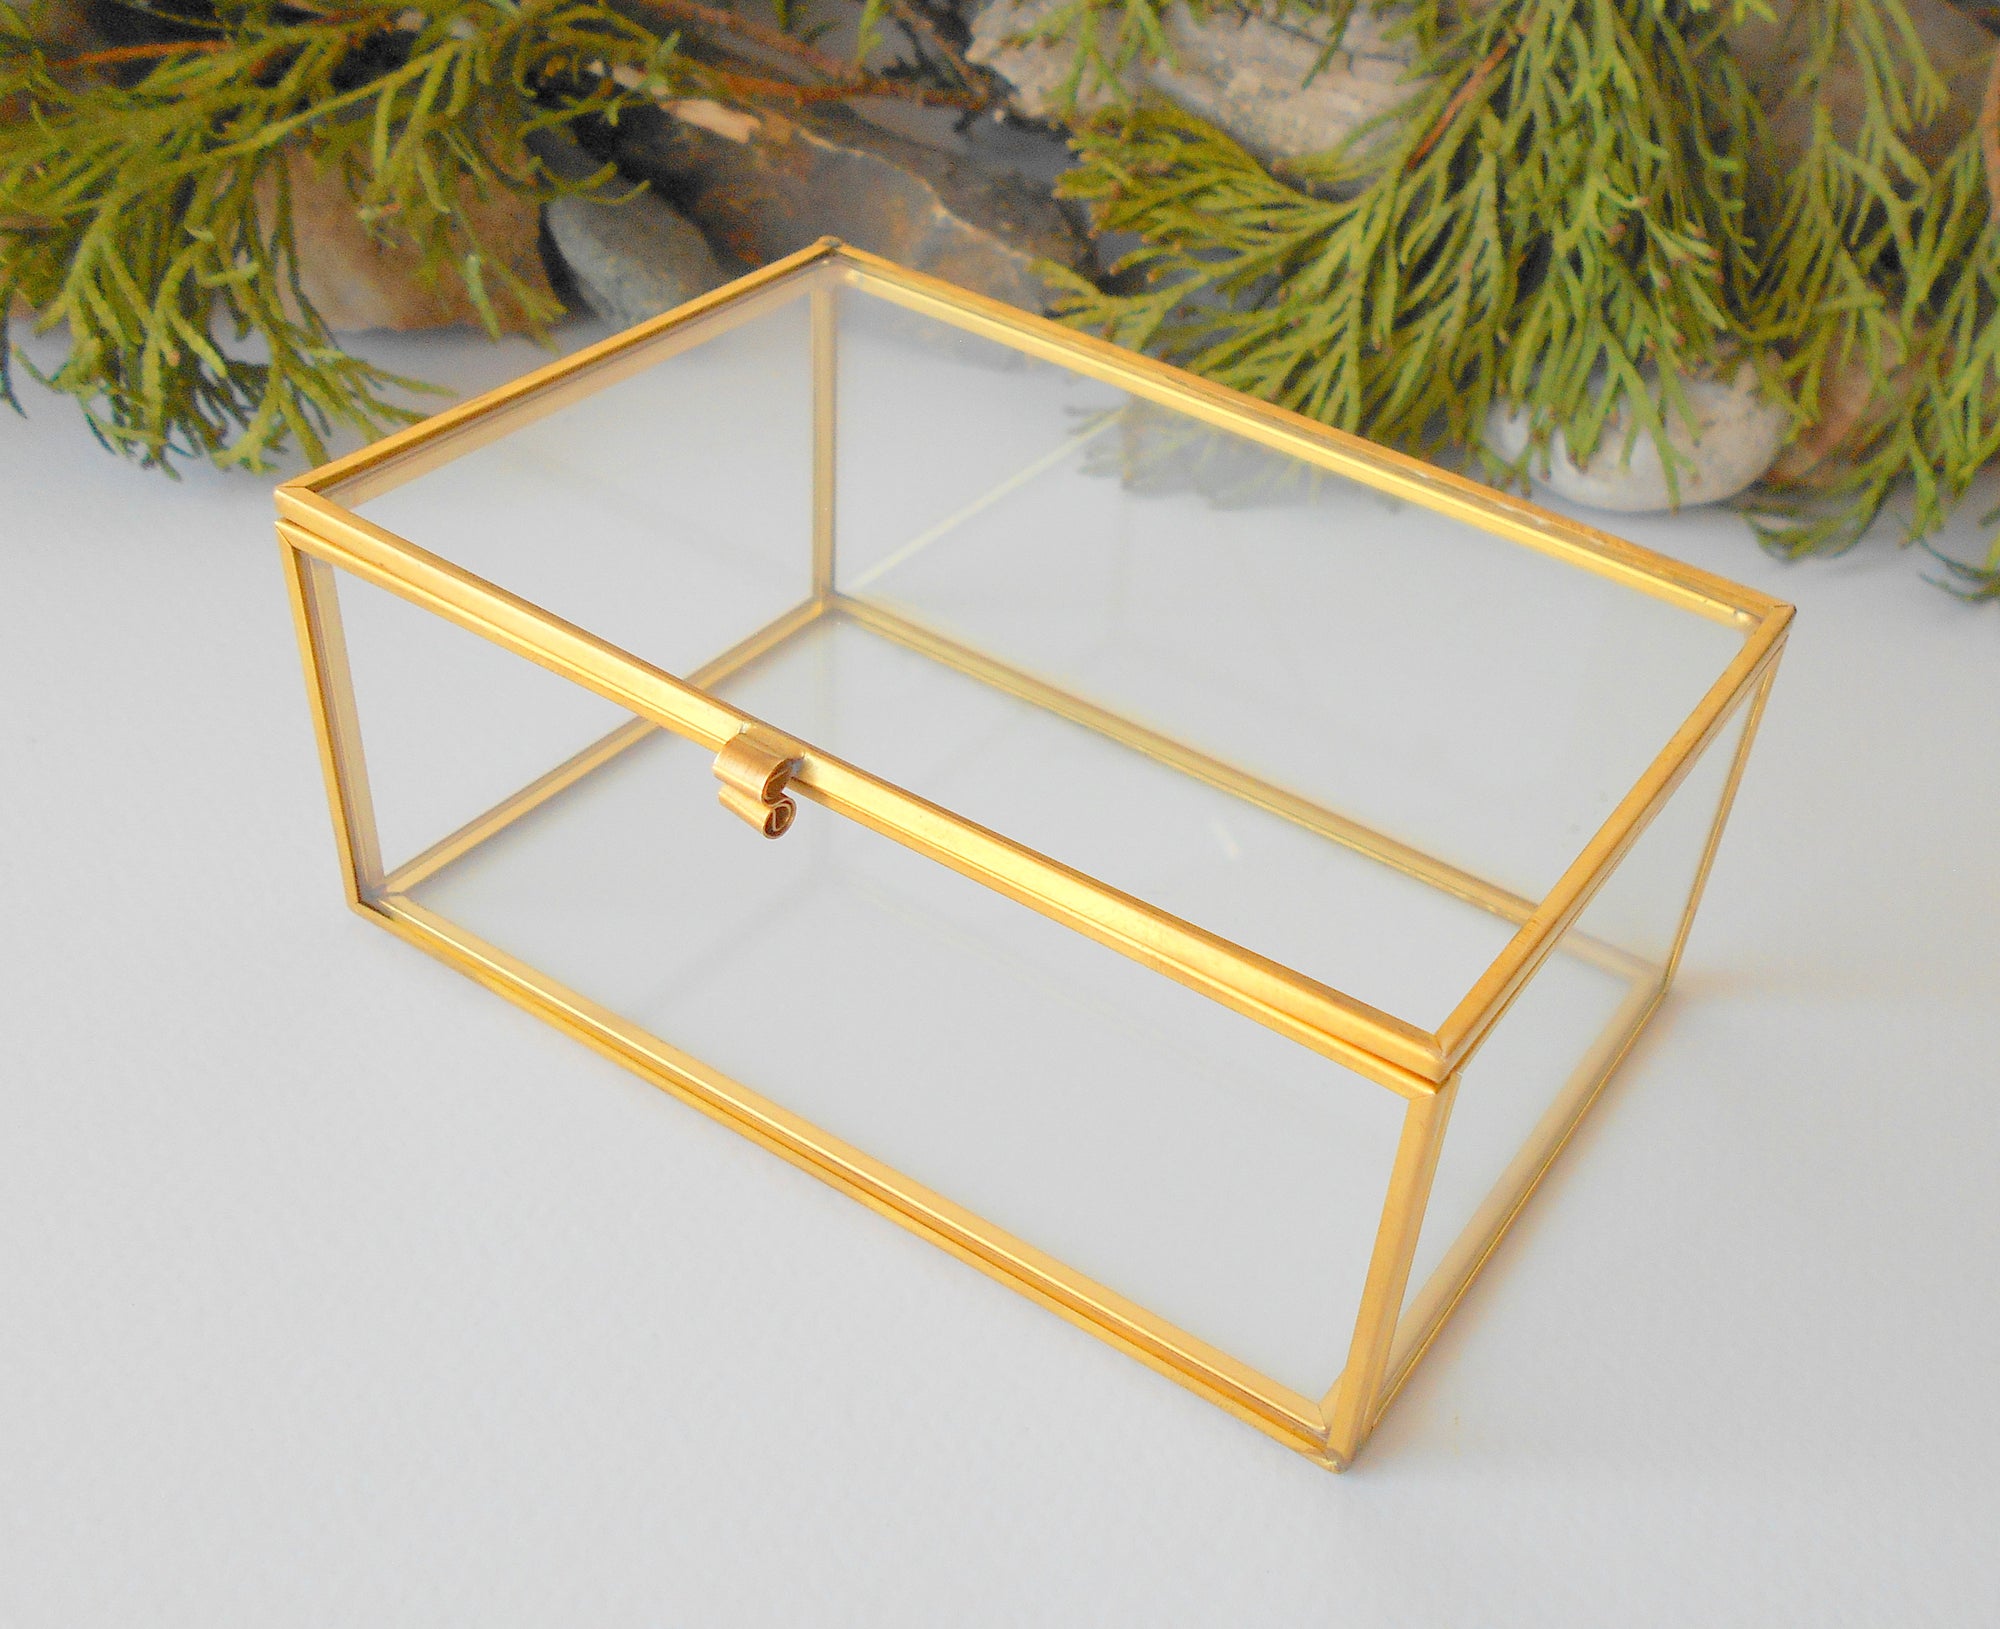 This is a small glass box made of real glass and metal edges and metal hinges that closes with a gold-color closing that may display various things like jewelry, miniatures, crystals, or other small objects of importance to you or your friends. It can be used for tiny or small terrarium projects. The edges of the box are also gold-color metal pieces.&nbsp;